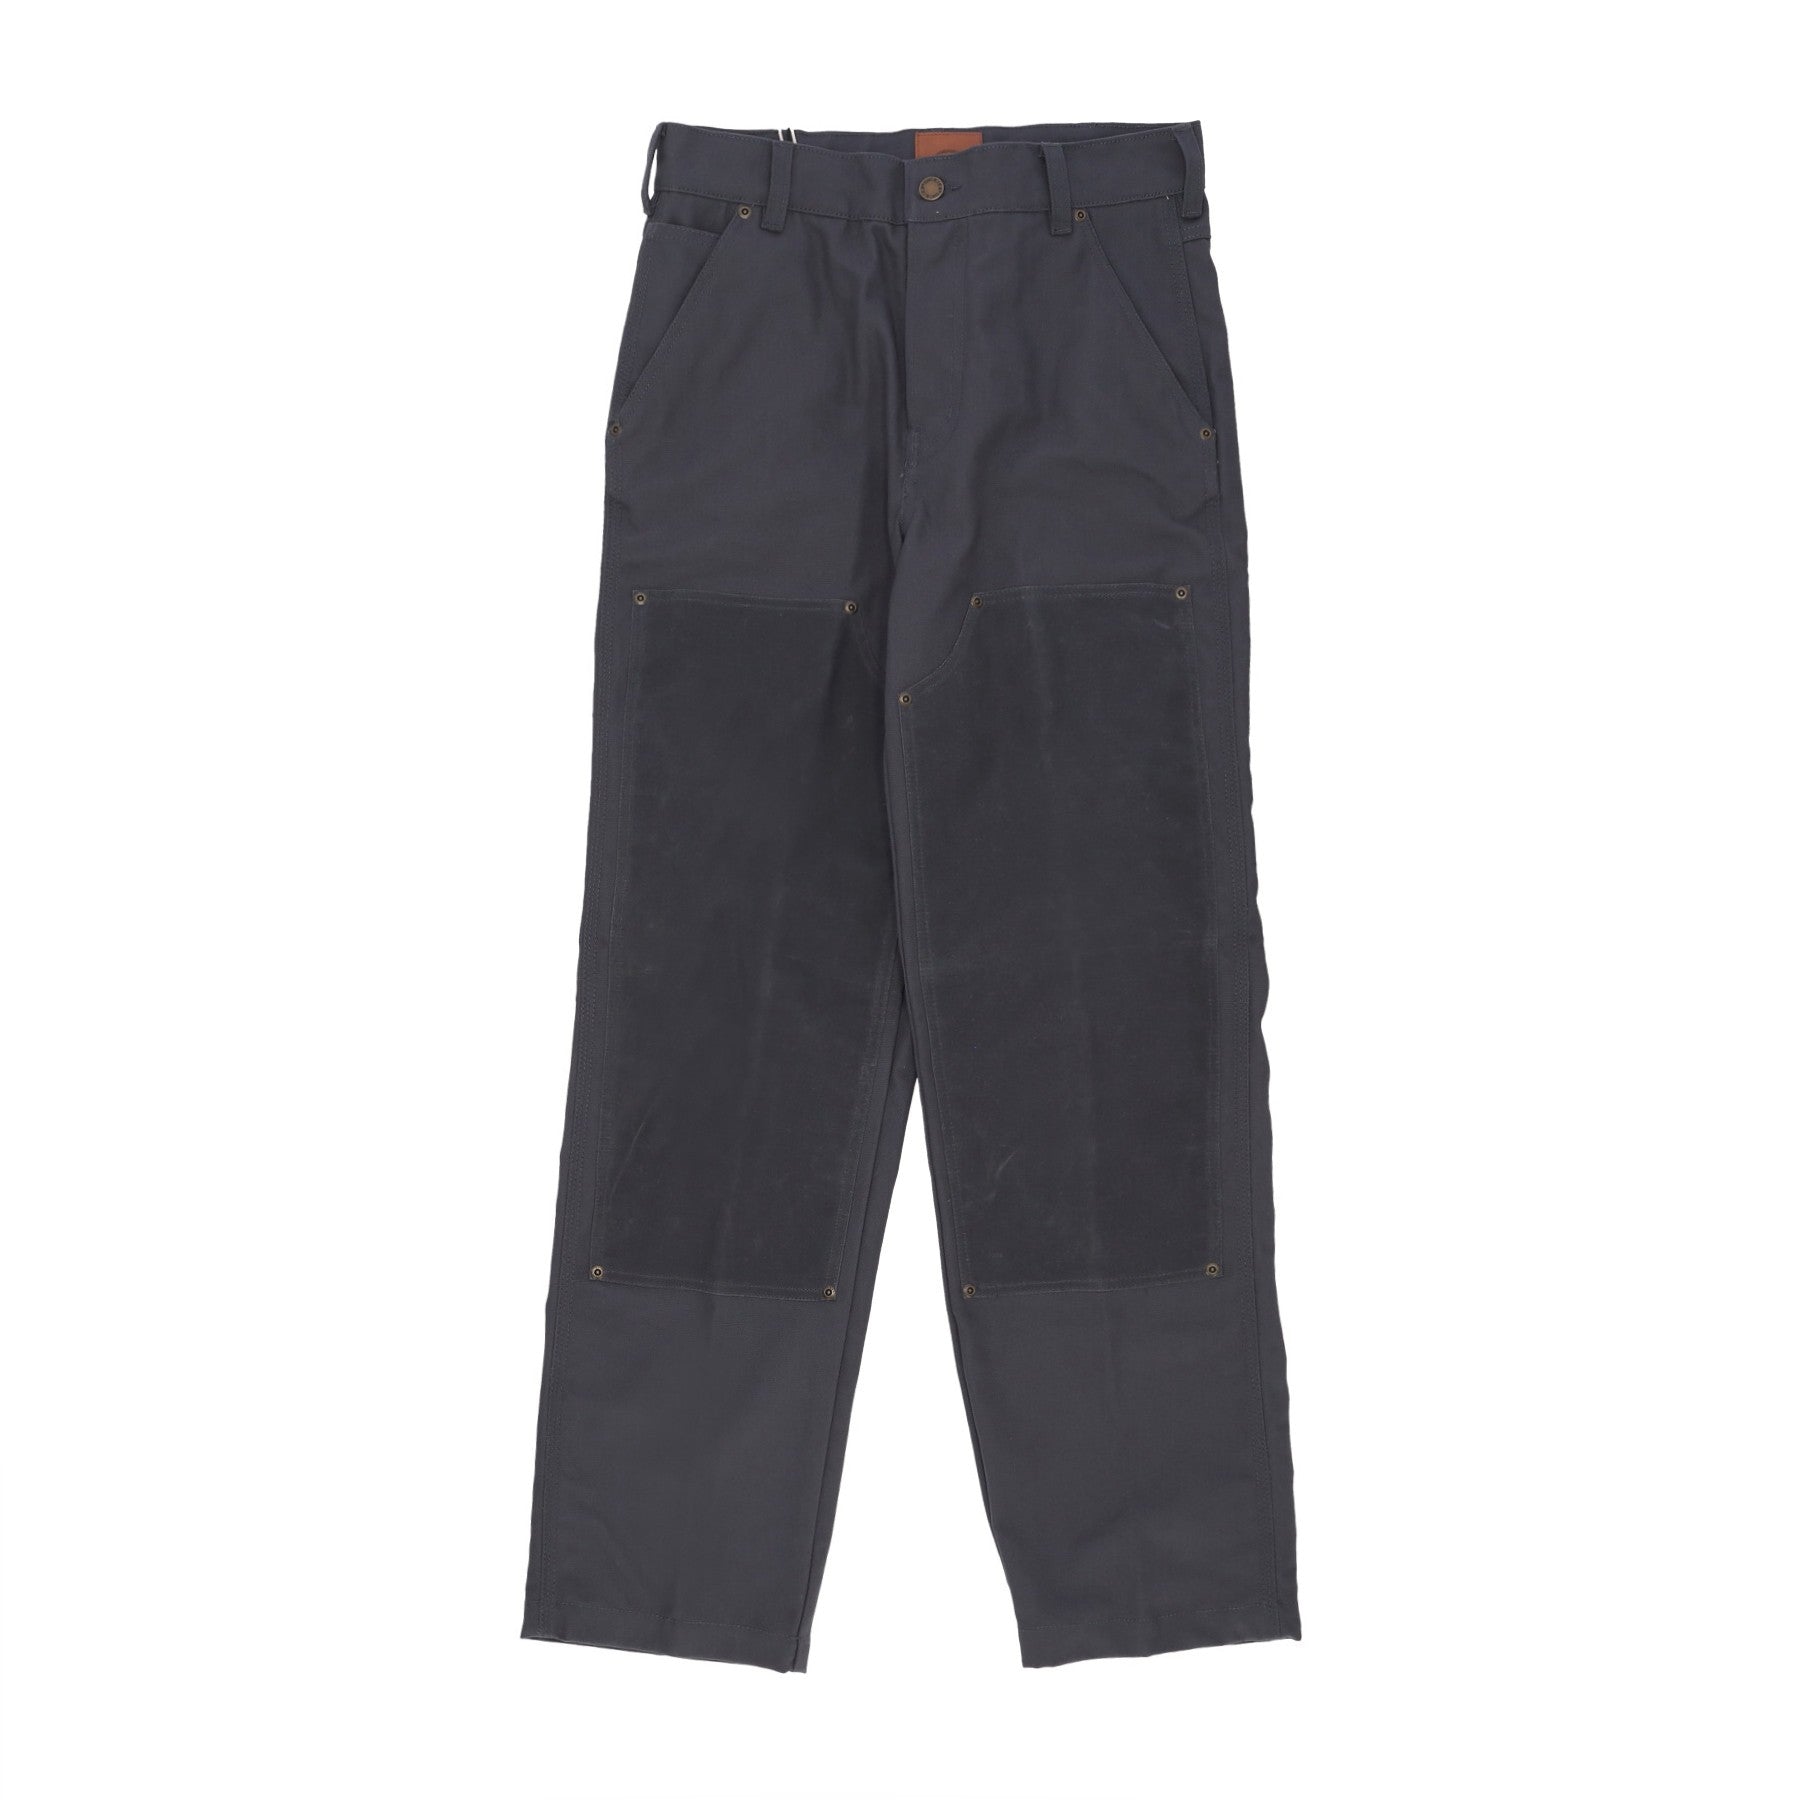 Dickies, Pantalone Lungo Uomo Lucas Waxed Double Knee Pant, Charcoal Grey